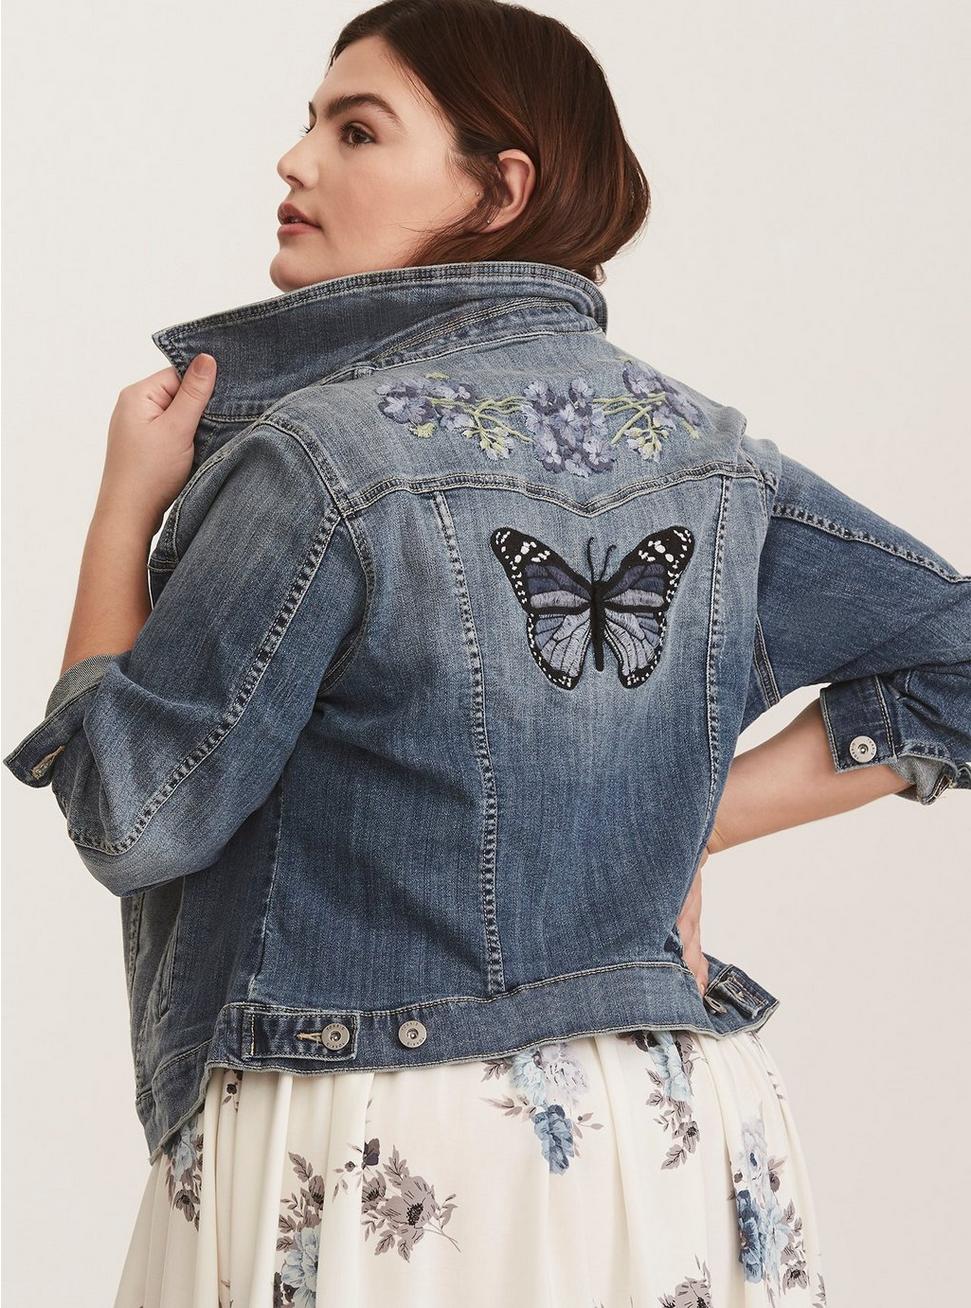 Plus Size - Floral Butterfly Embroidered Denim Jacket - Torrid